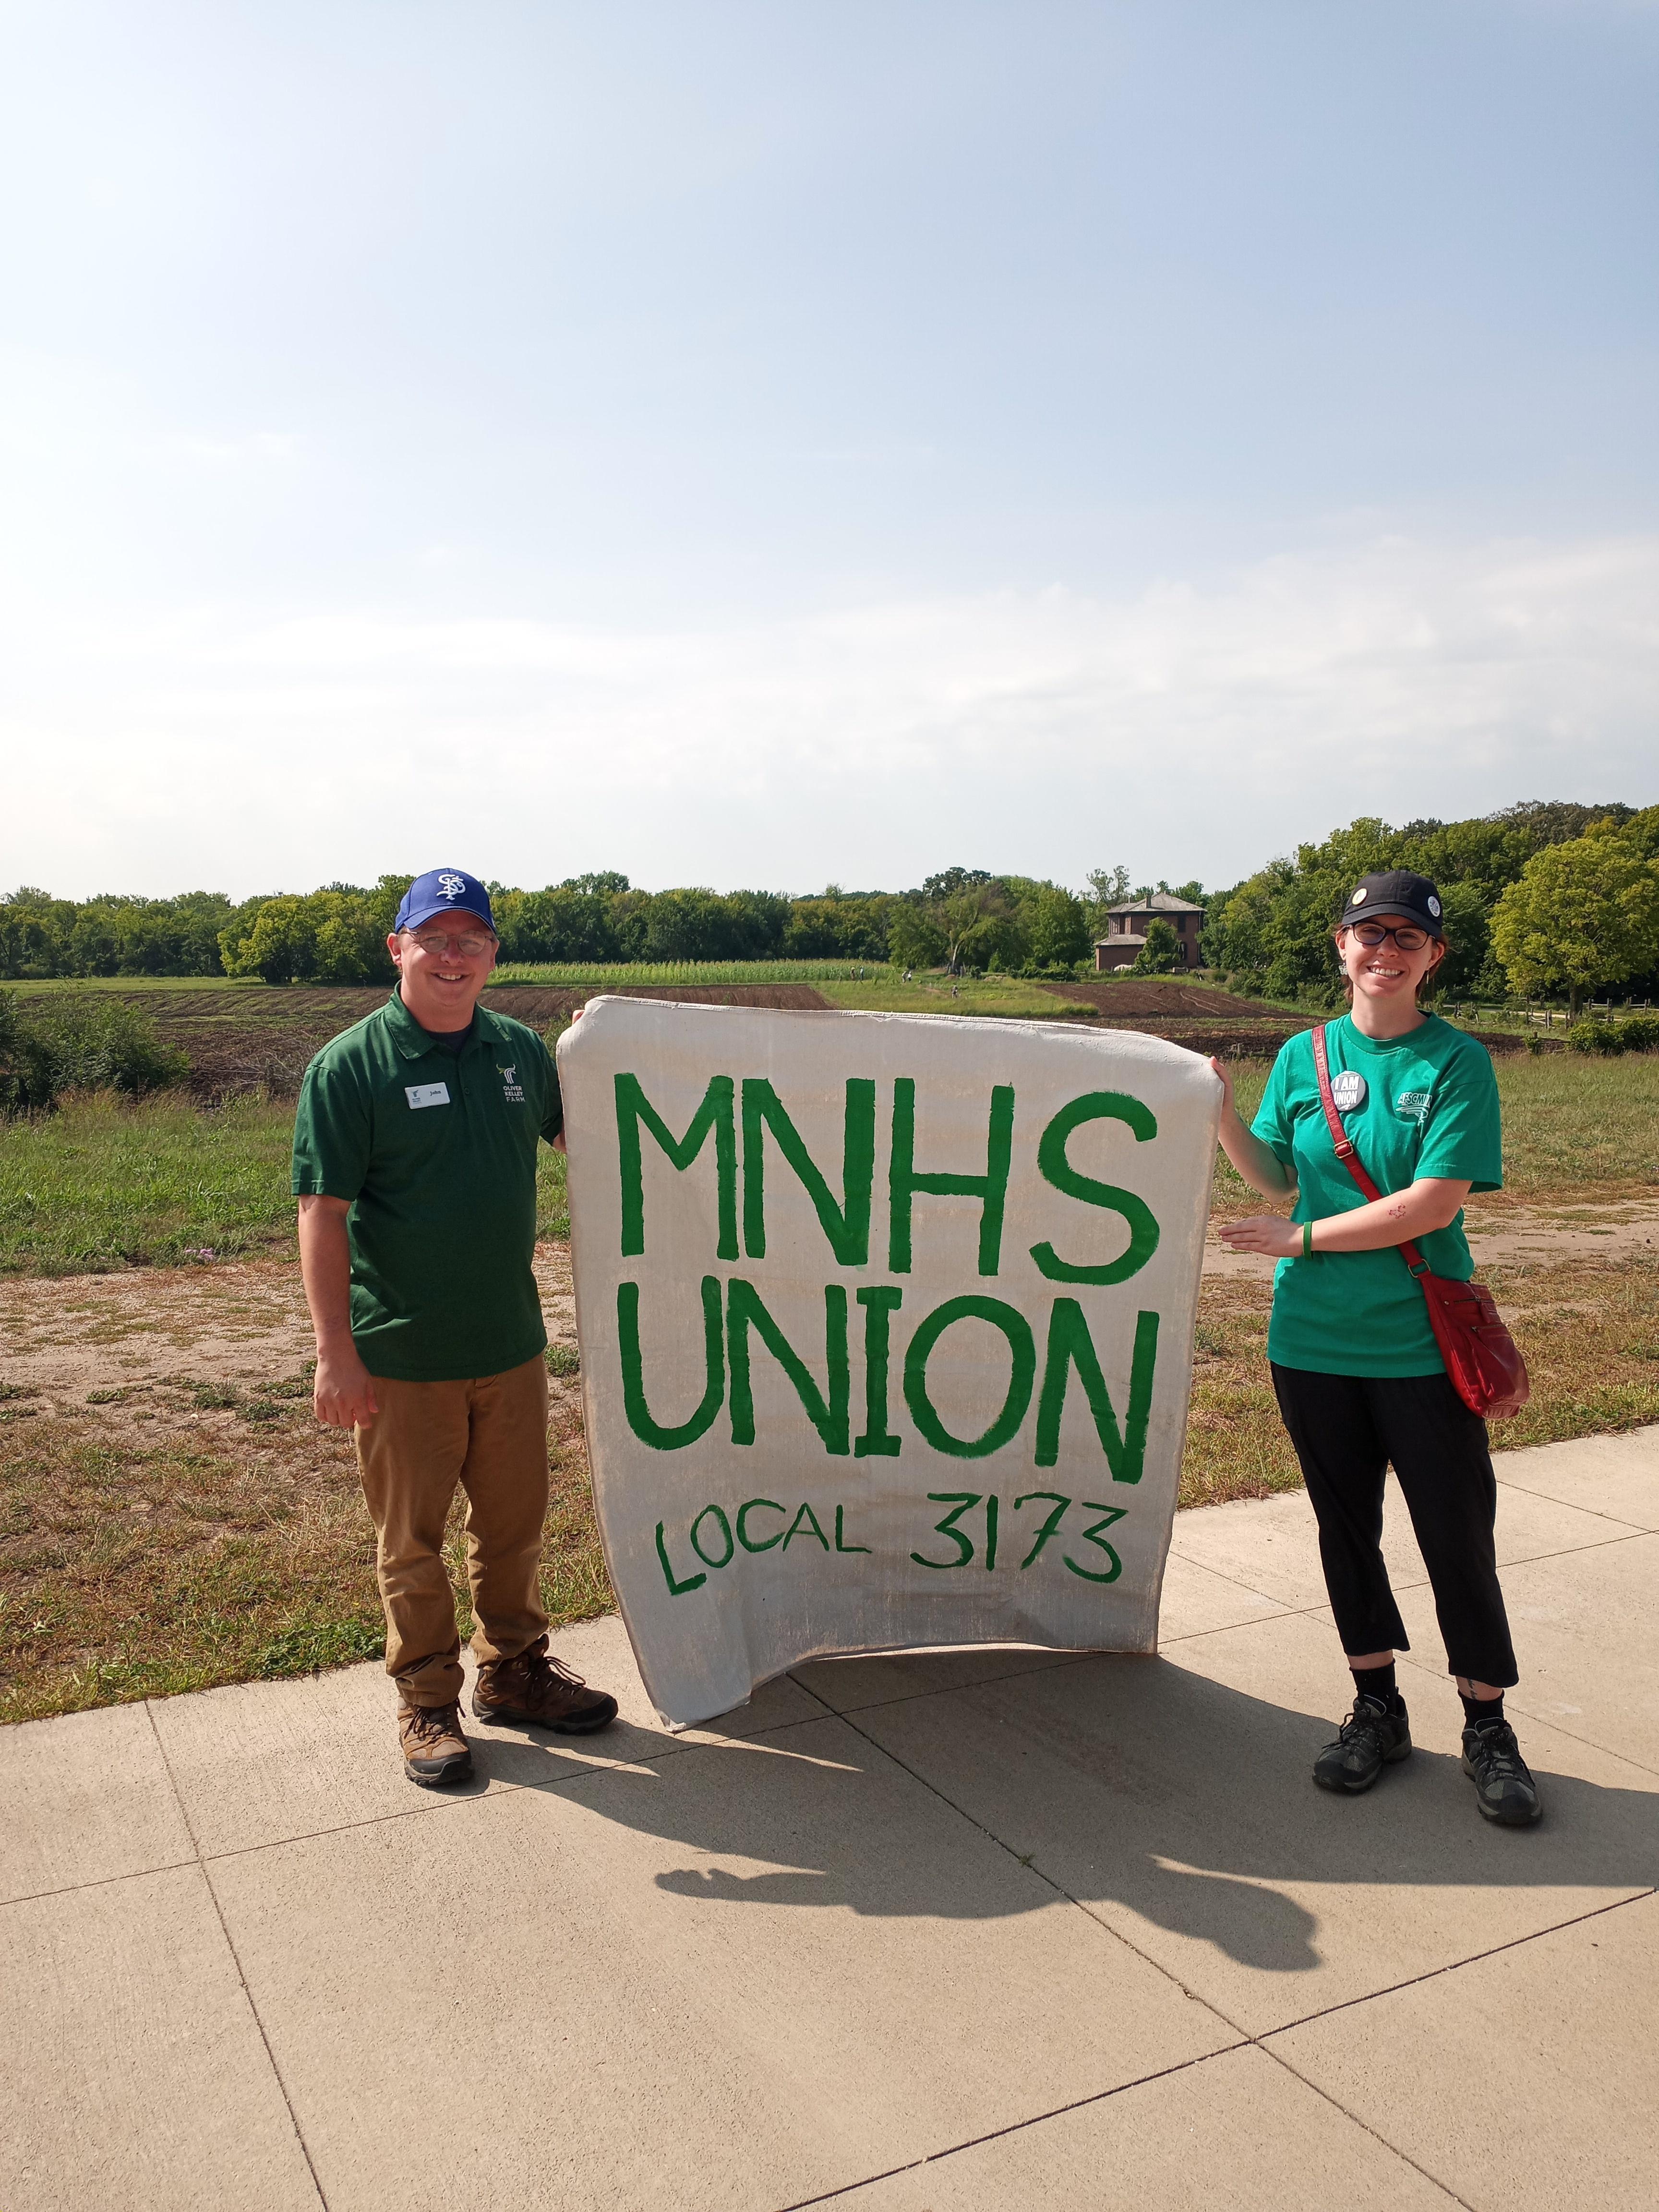 MNHS Union banner at the Oliver Kelley Farm